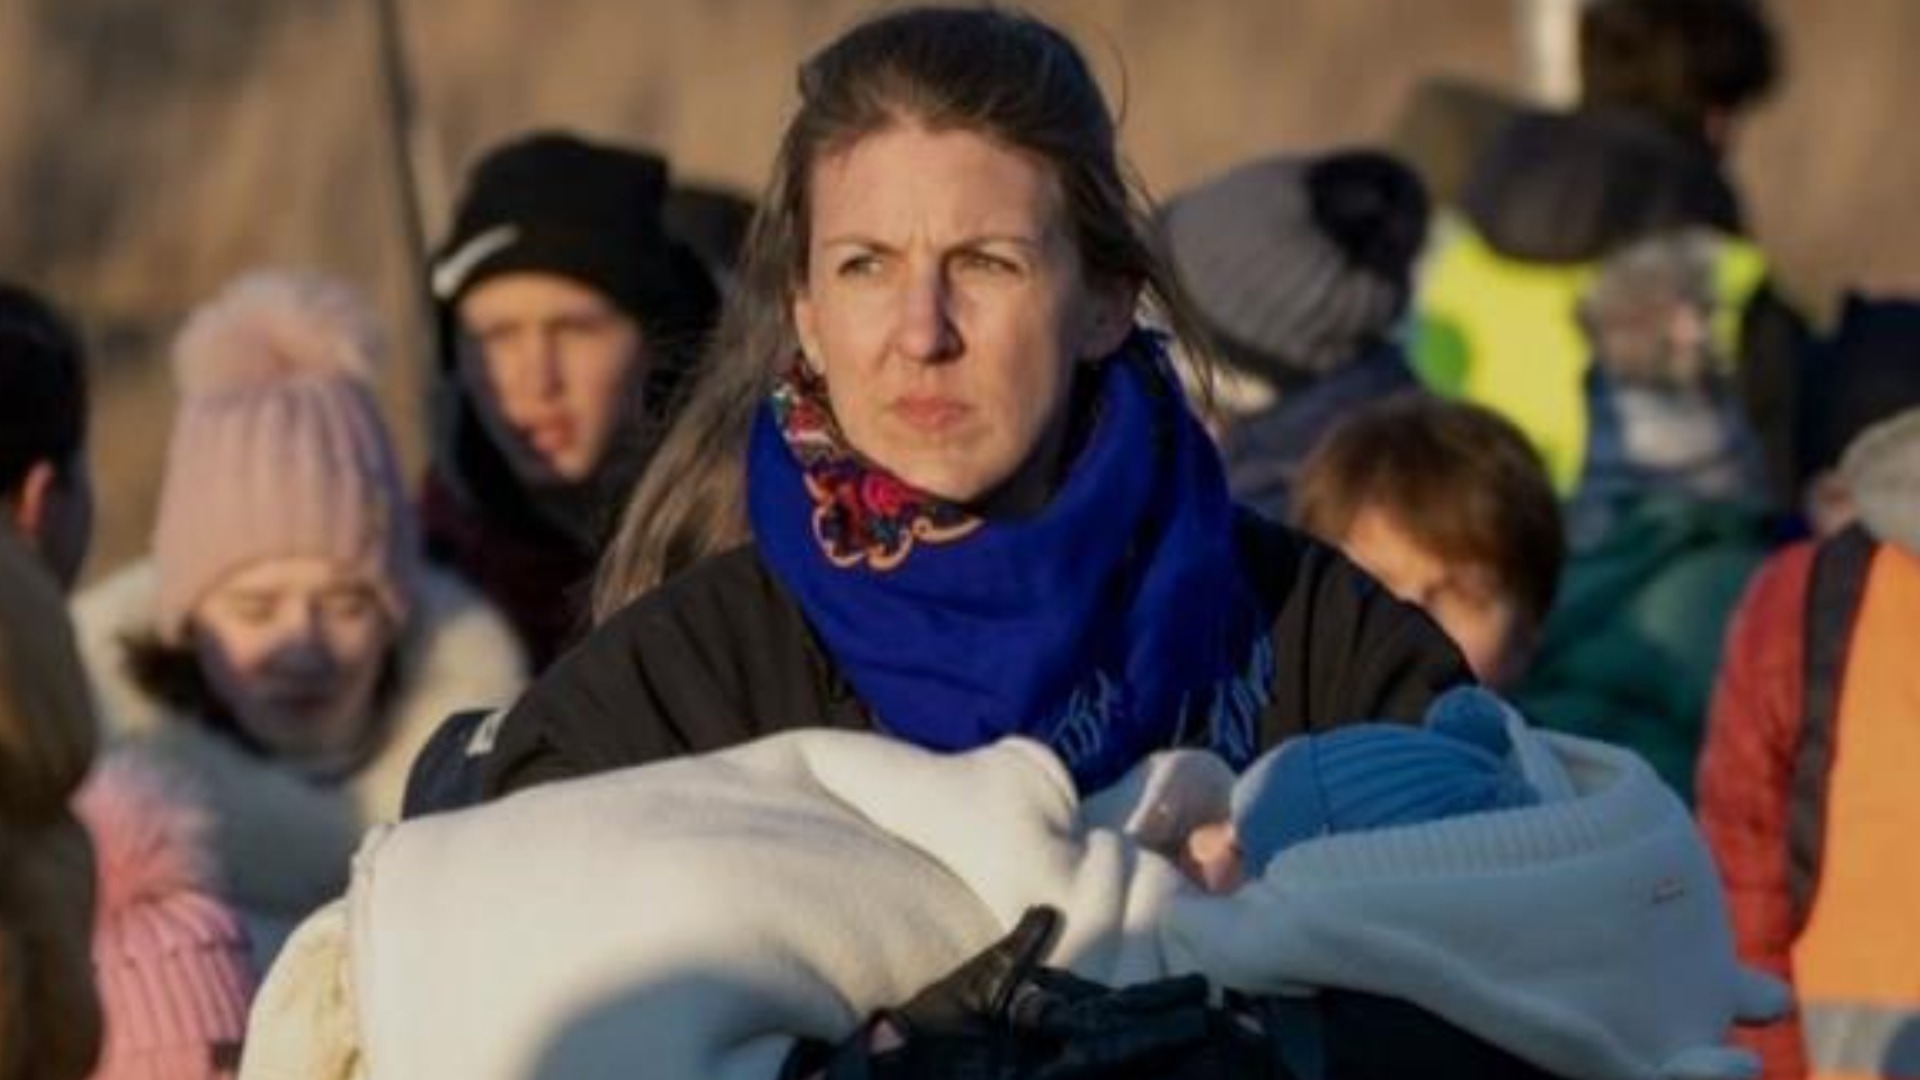 This Toronto woman is helping Ukrainian refugees in Poland